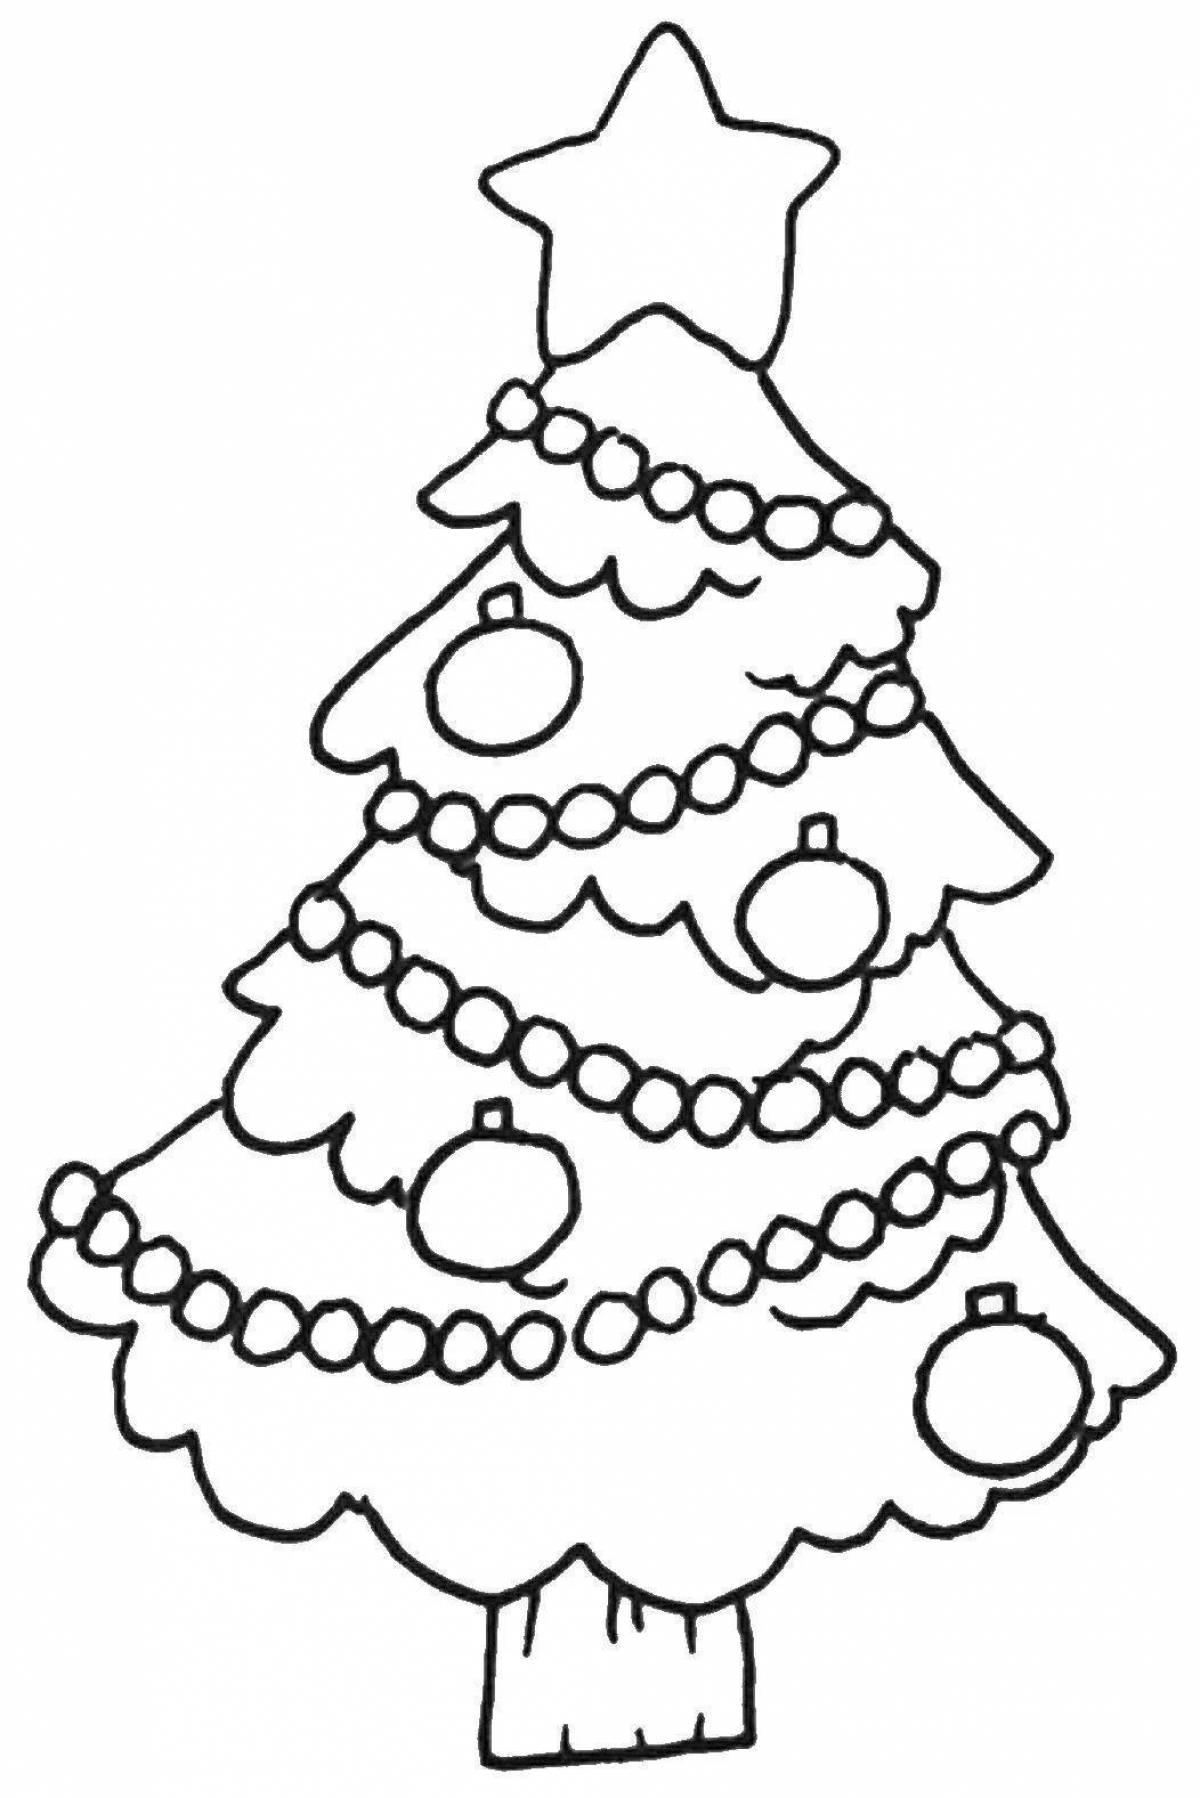 Exquisite Christmas tree coloring book for 5-6 year olds